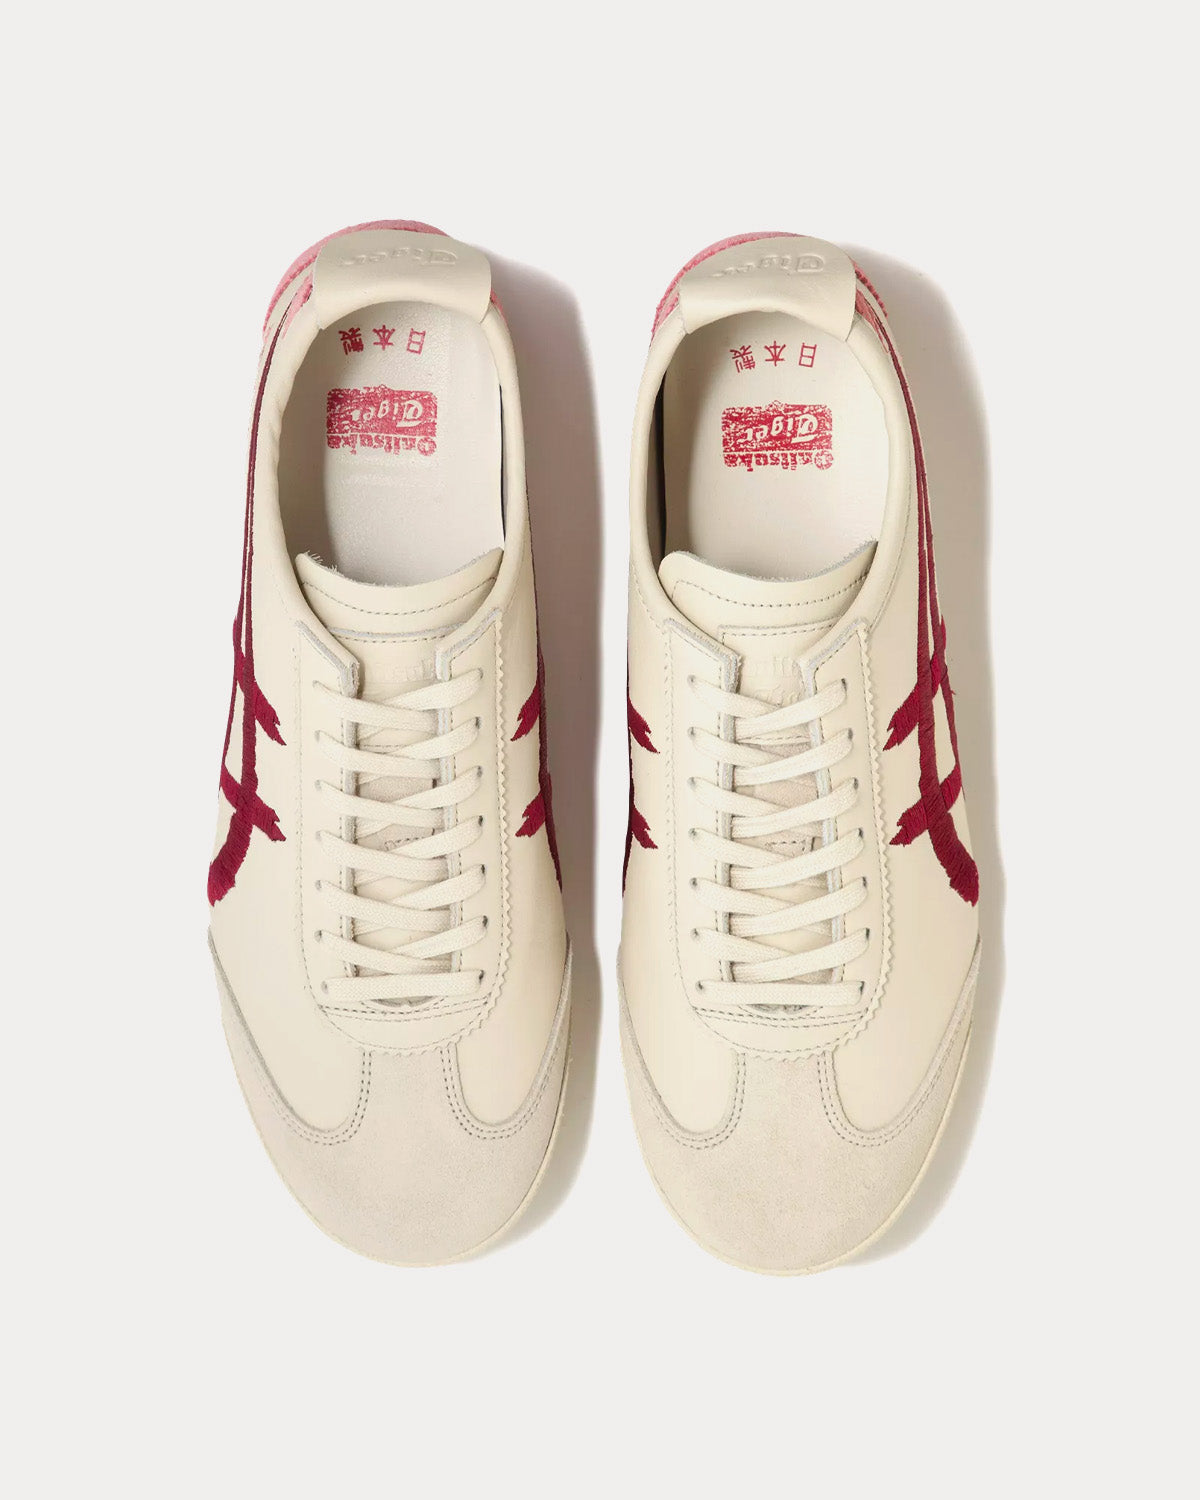 Onitsuka Tiger - Mexico 66 Deluxe NM Birch / Deep Mars Low Top Sneakers